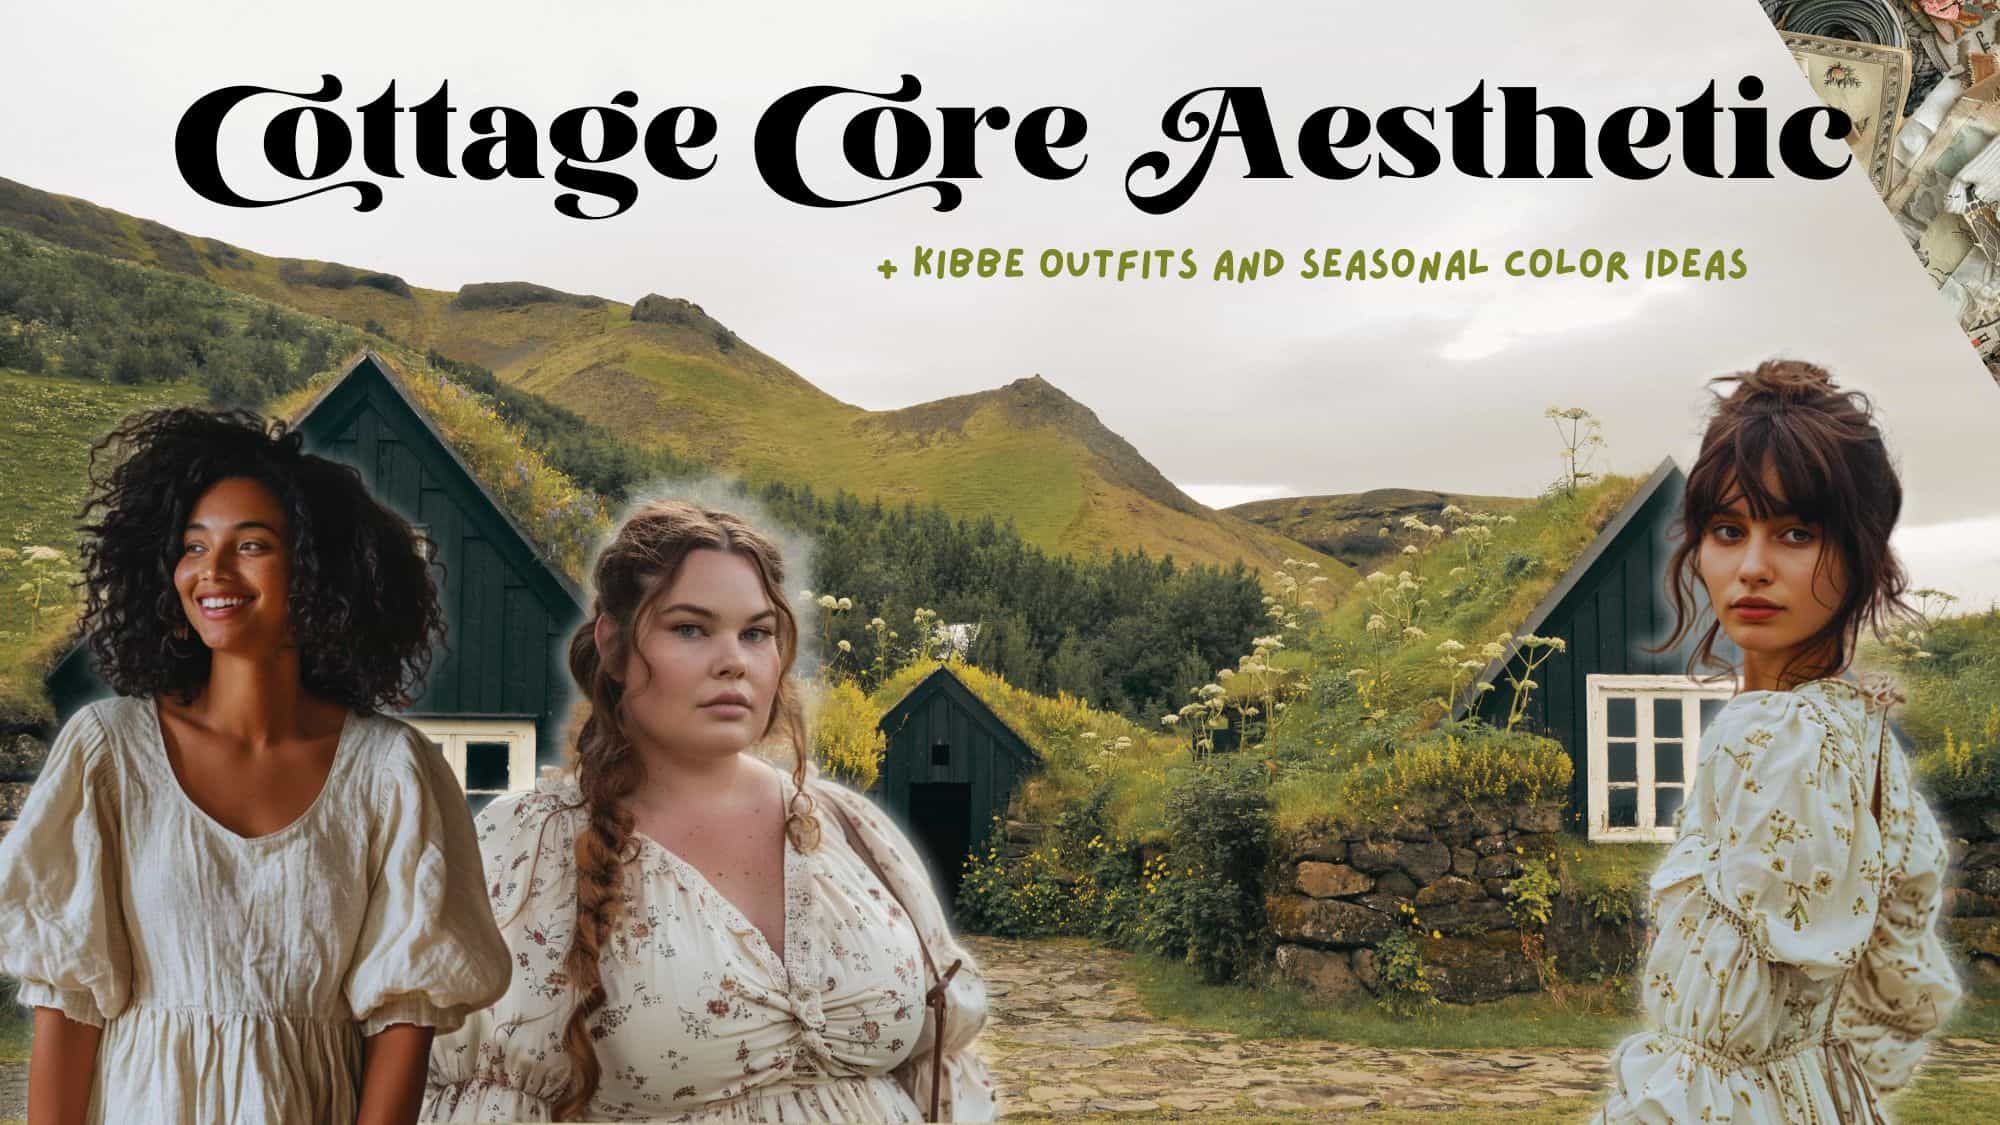 cottage core aesethtic with kibbe and seasonal color outfits, image of women in cottage core outfits with green field and cottage behind them